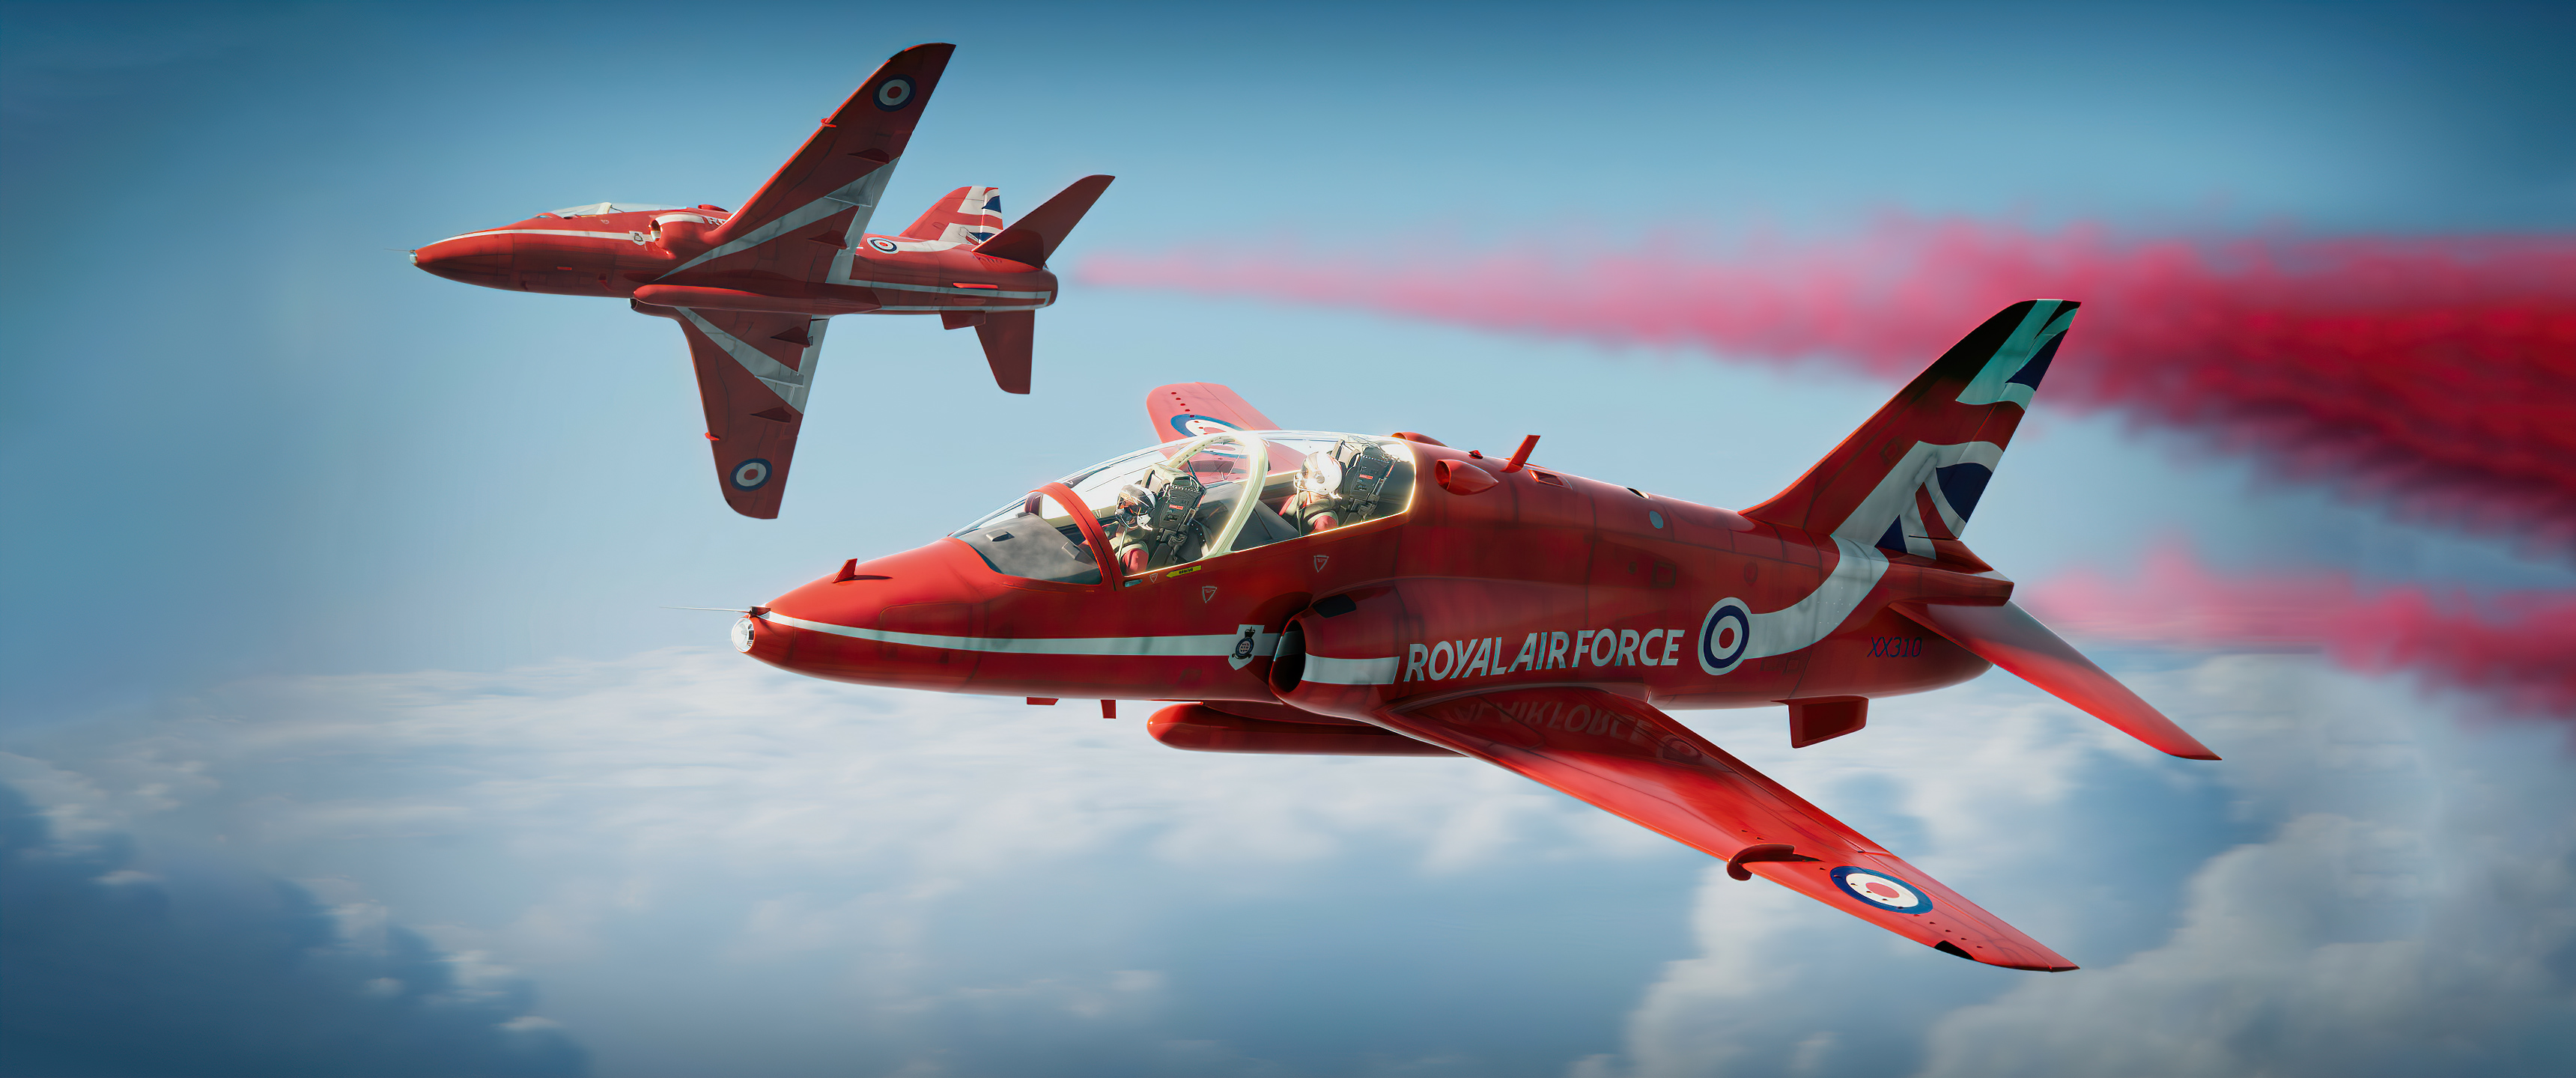 Red Arrows Plane Art 4k 2048x1152 Resolution HD 4k Wallpaper, Image, Background, Photo and Picture